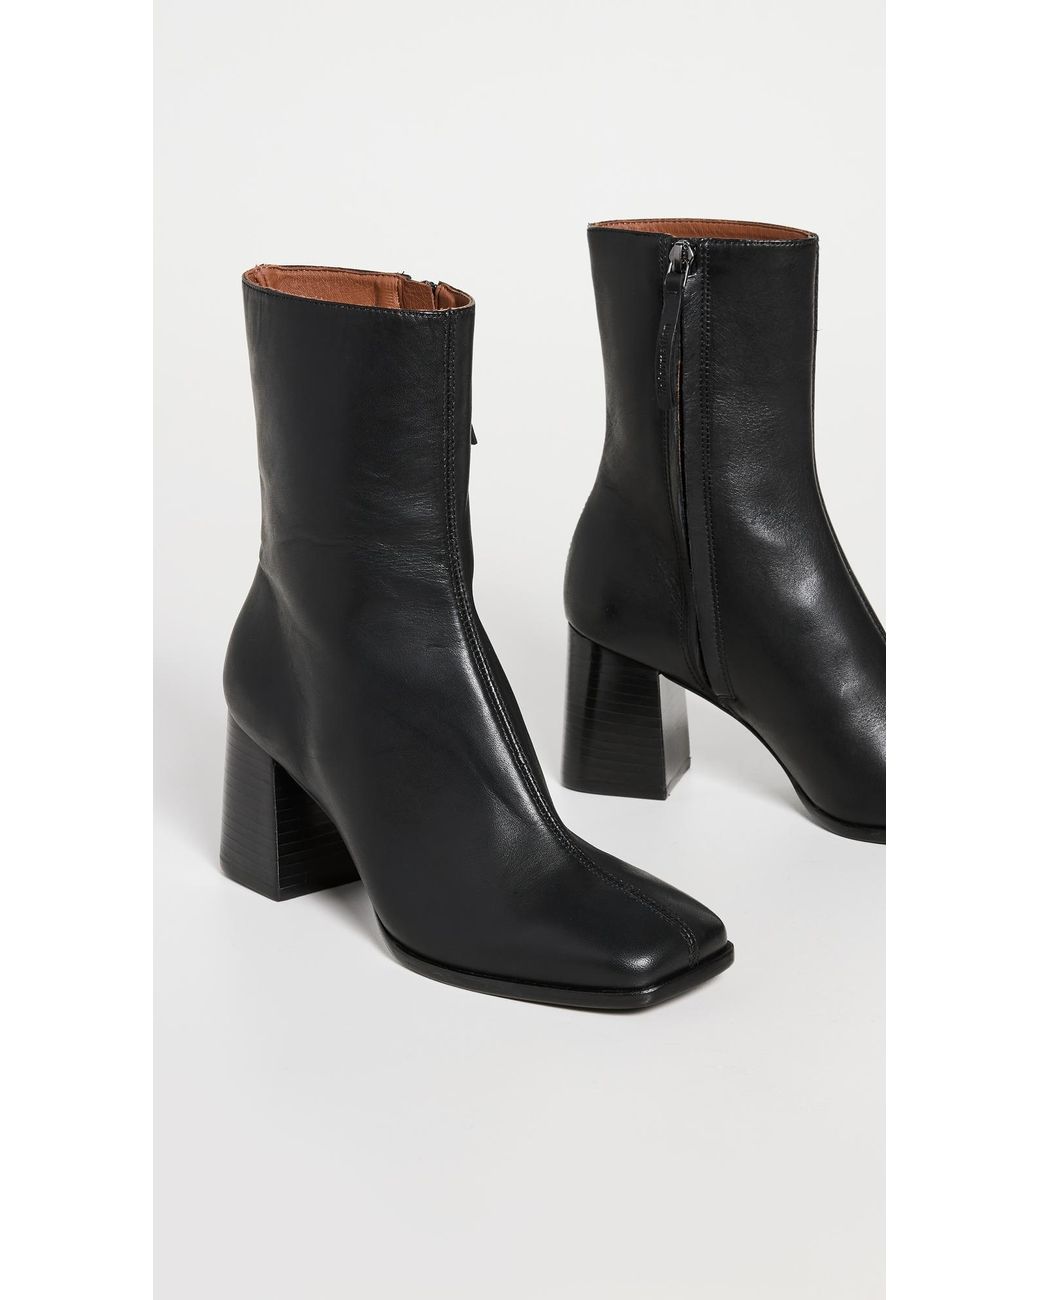 Reformation Nari Ankle Boots in Black | Lyst